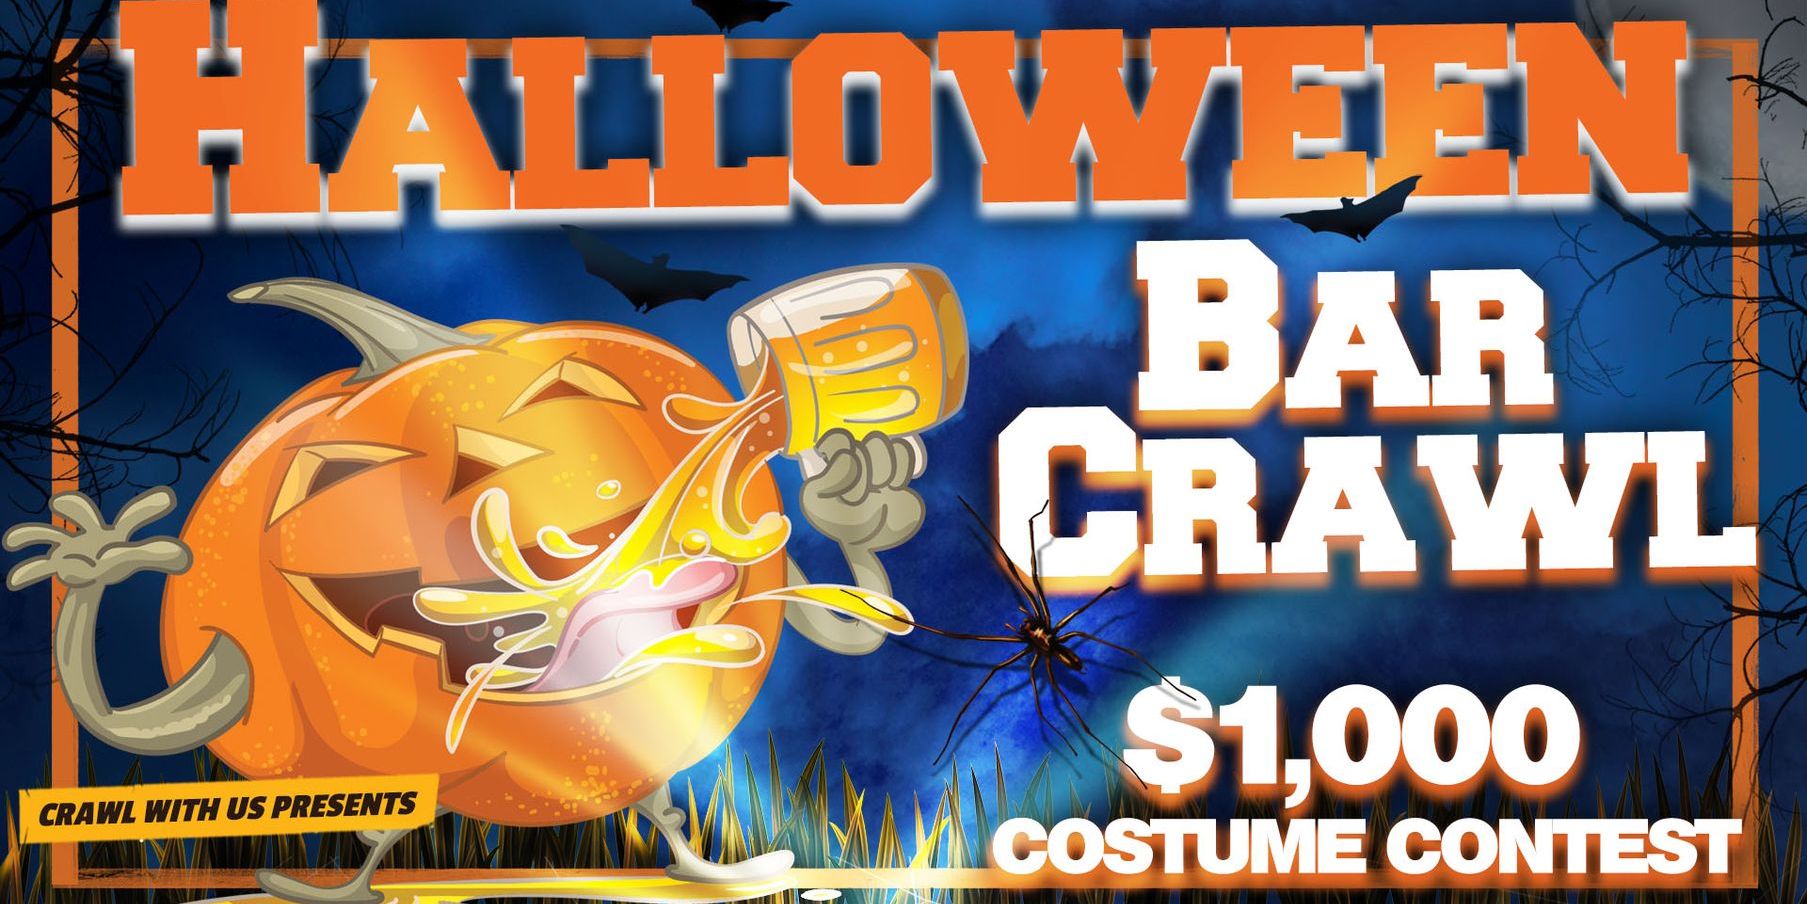 The 4th Annual Halloween Bar Crawl - Madison promotional image